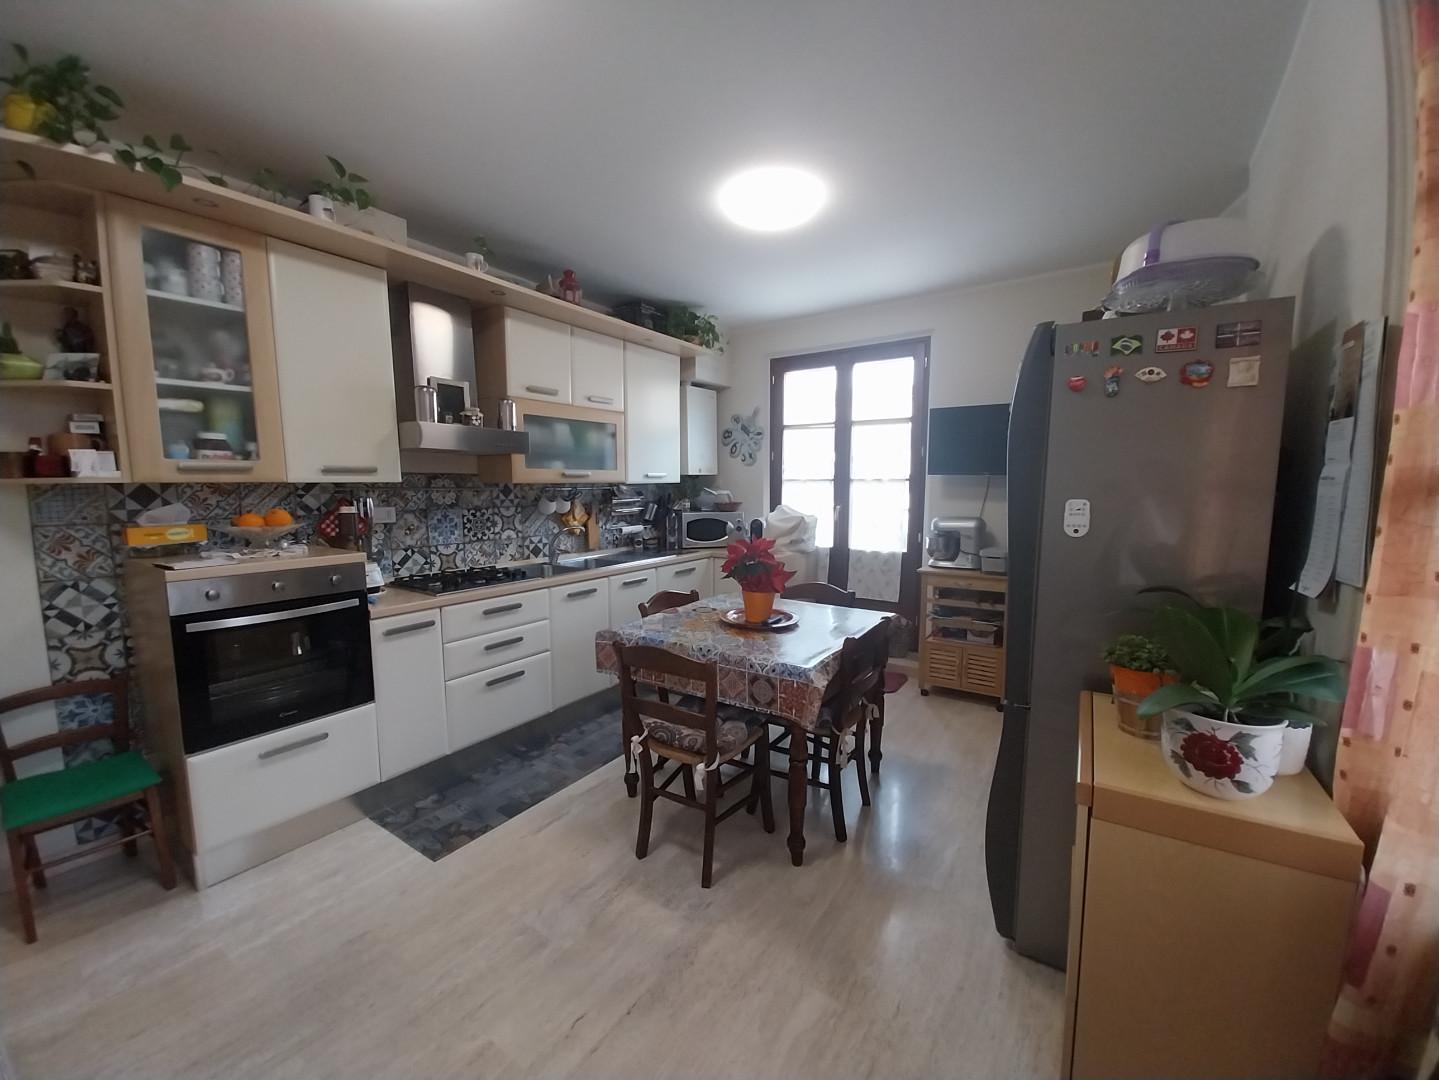 Apartment for sale in Calci (PI)